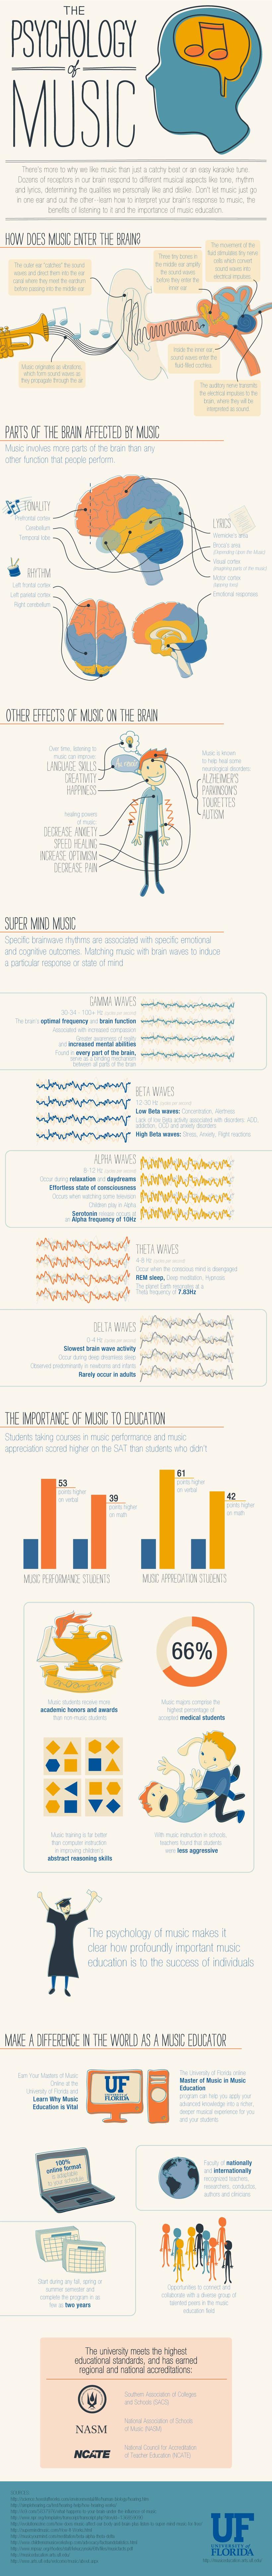 Effect of Music